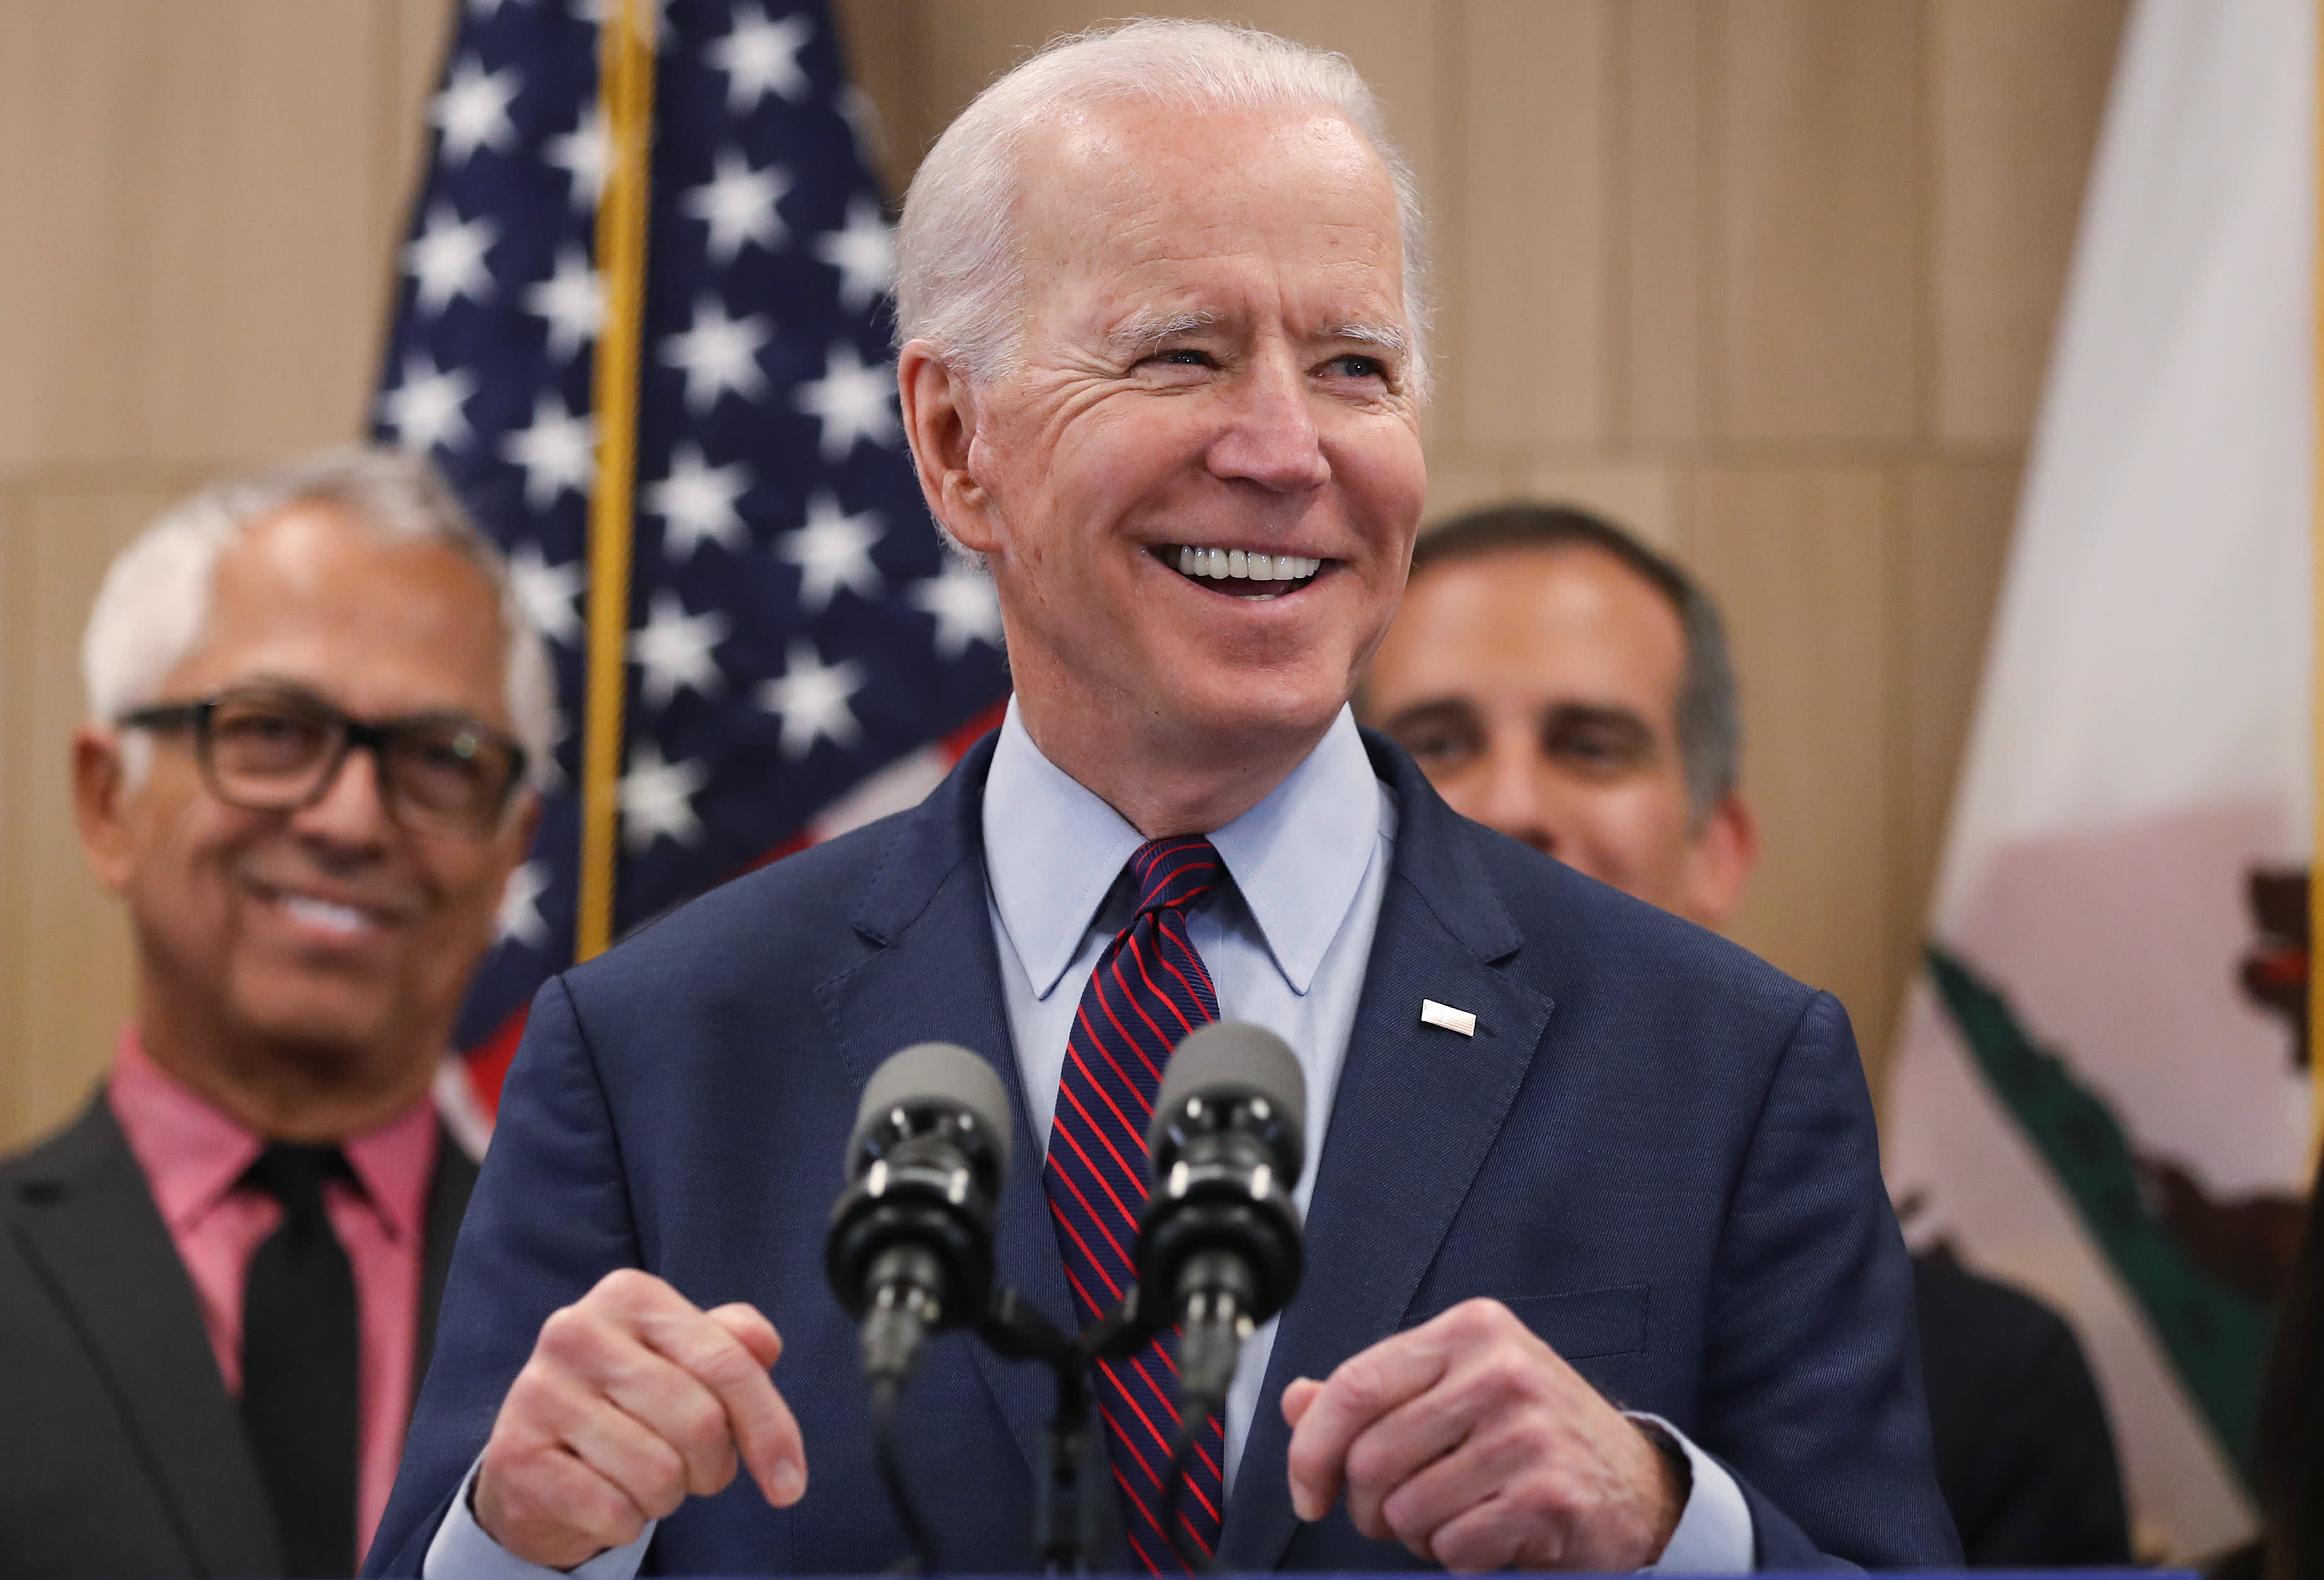 Investment decision alternatives to contemplate just after Biden’s election gain